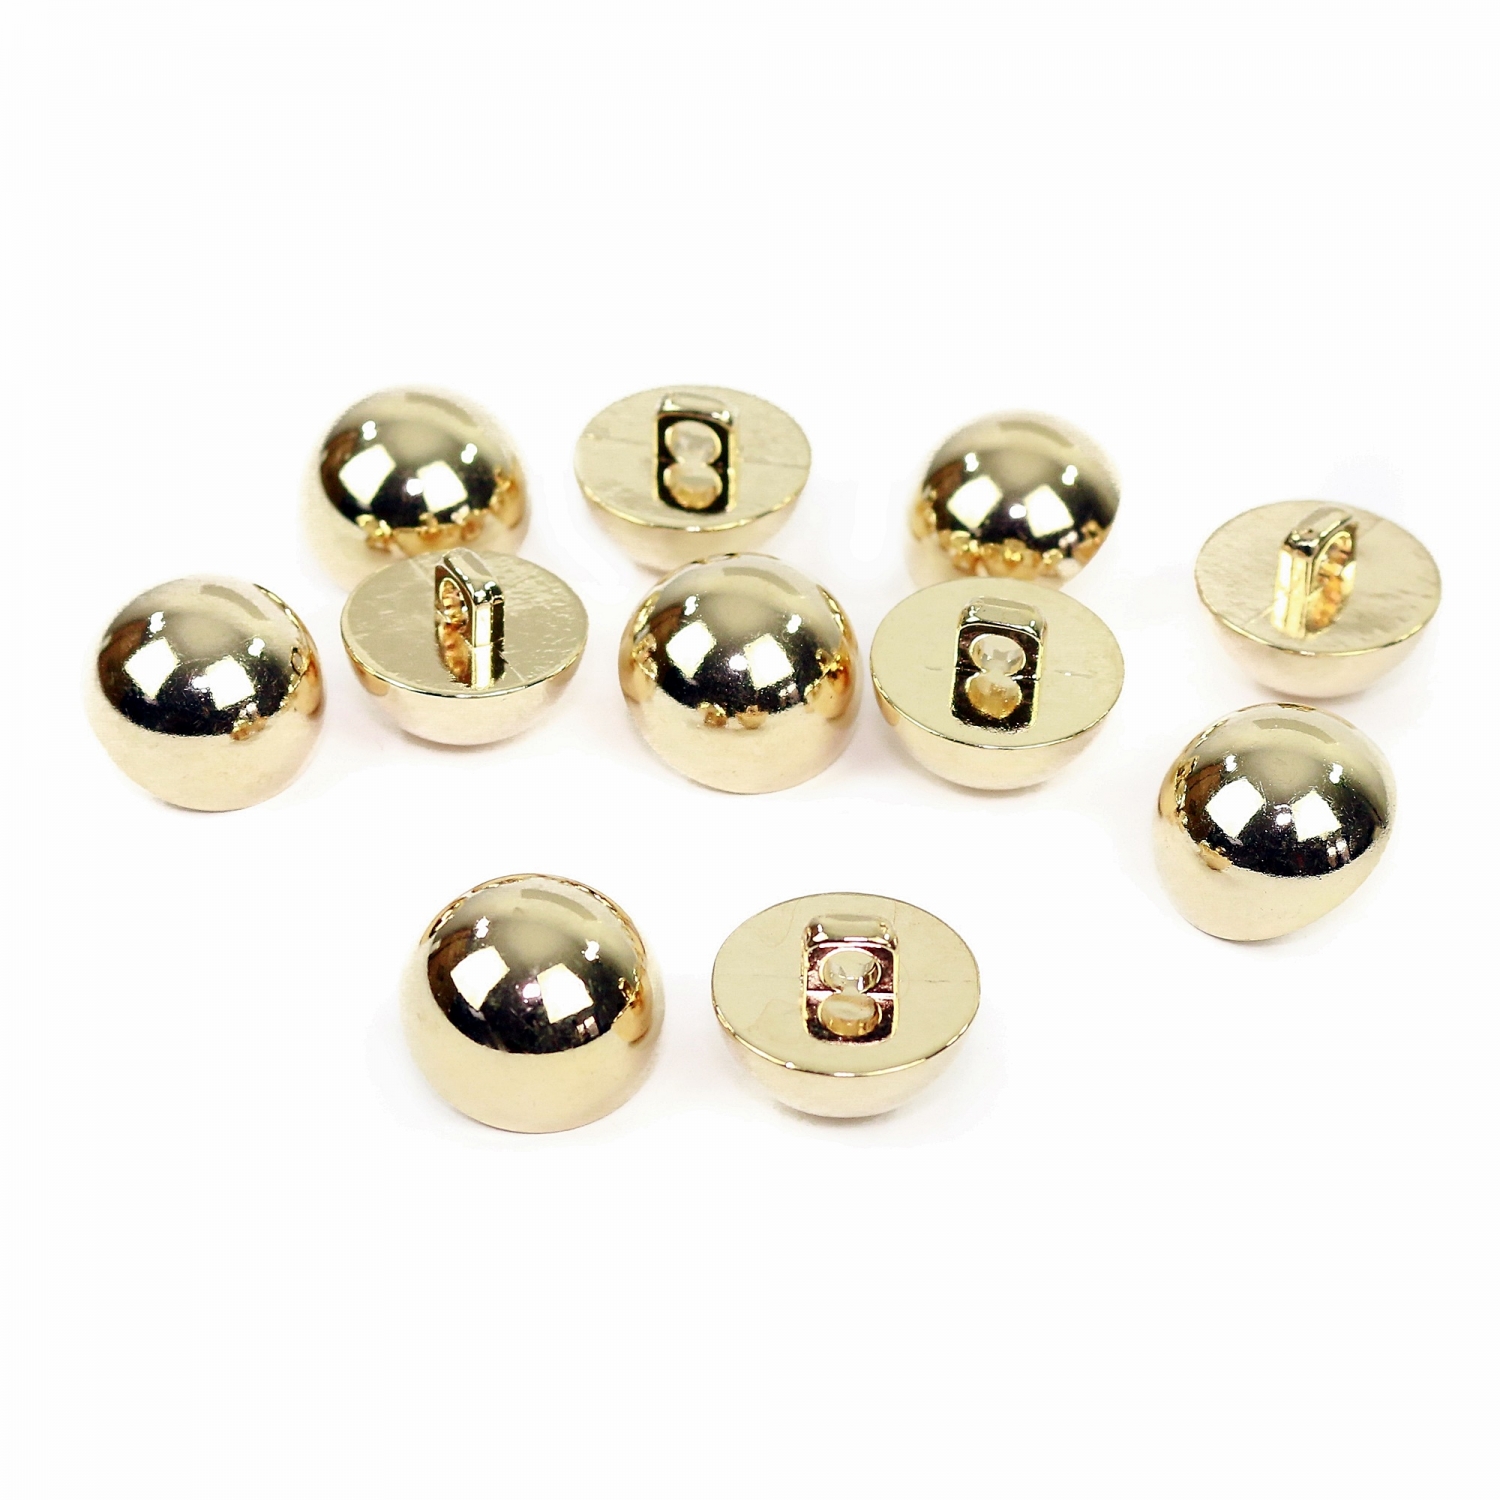 Plastic Metallized Shank Buttons (144 pcs/pack) Code: B3100